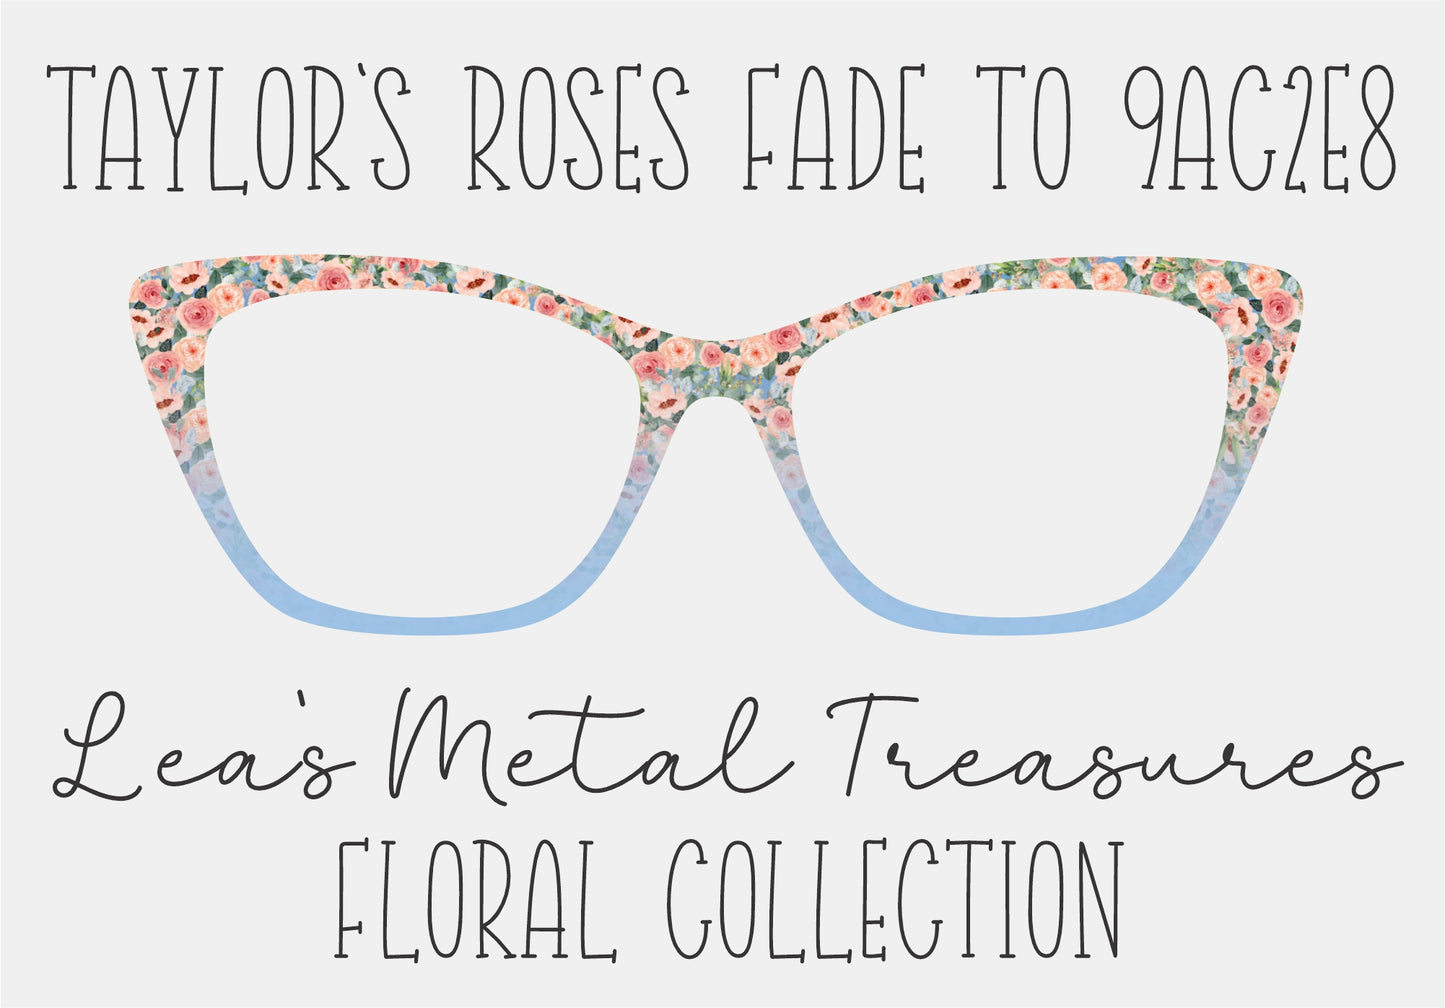 TAYLOR'S ROSES FADE TO 9AC2E8 Eyewear Frame Toppers COMES WITH MAGNETS